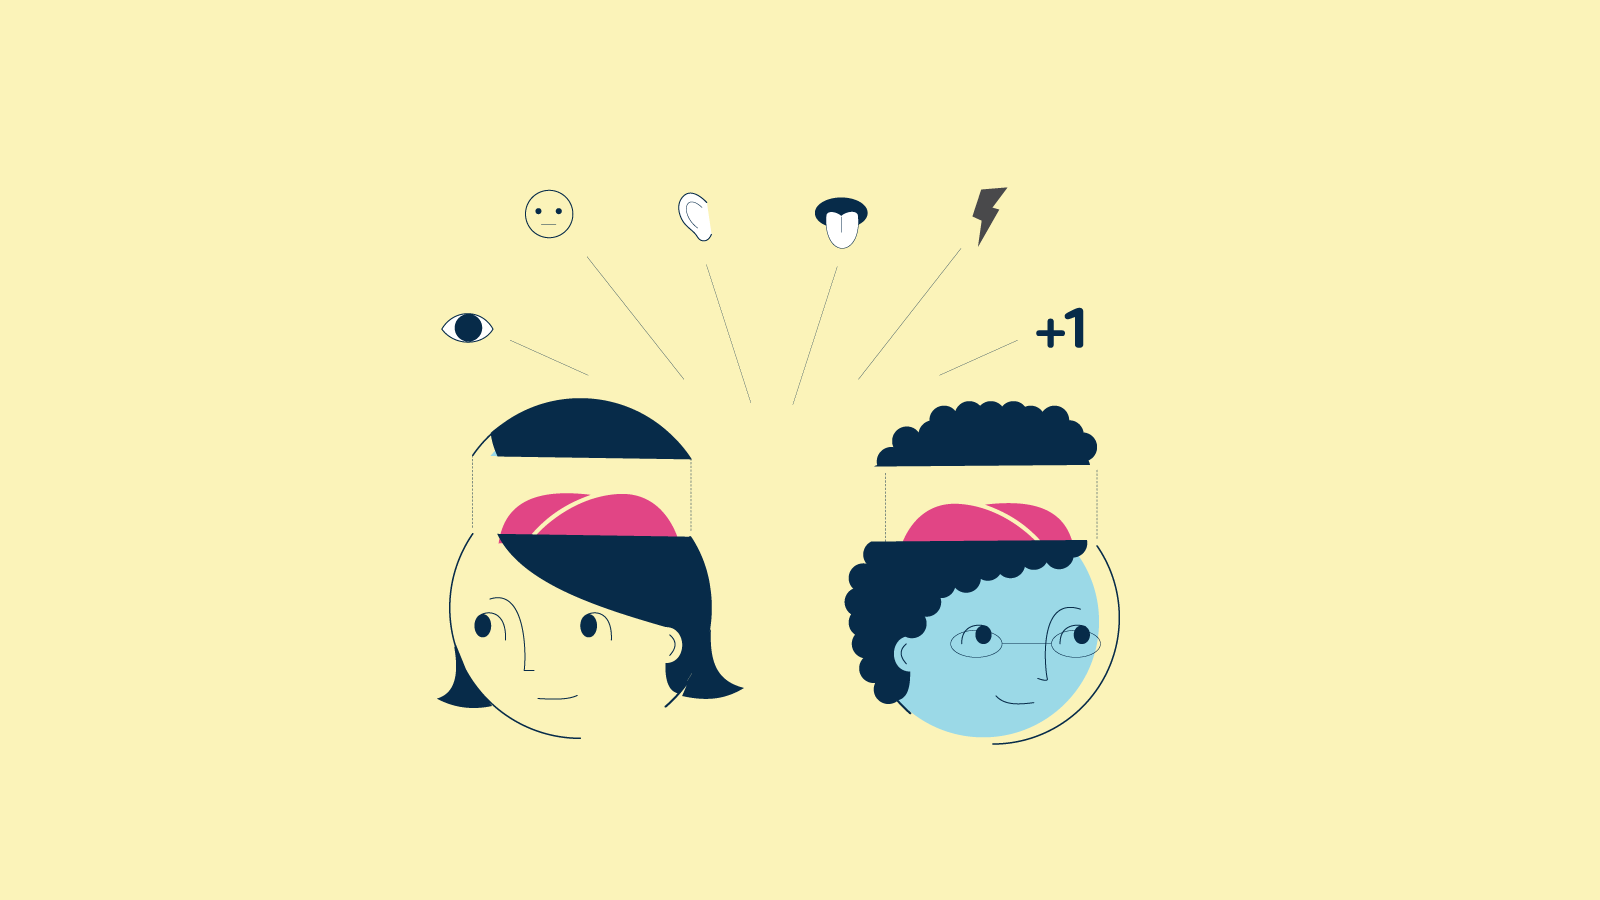 Abstract Illustration of cartoon people with the top of their heads raised displaying their brains, and symbols floating above.